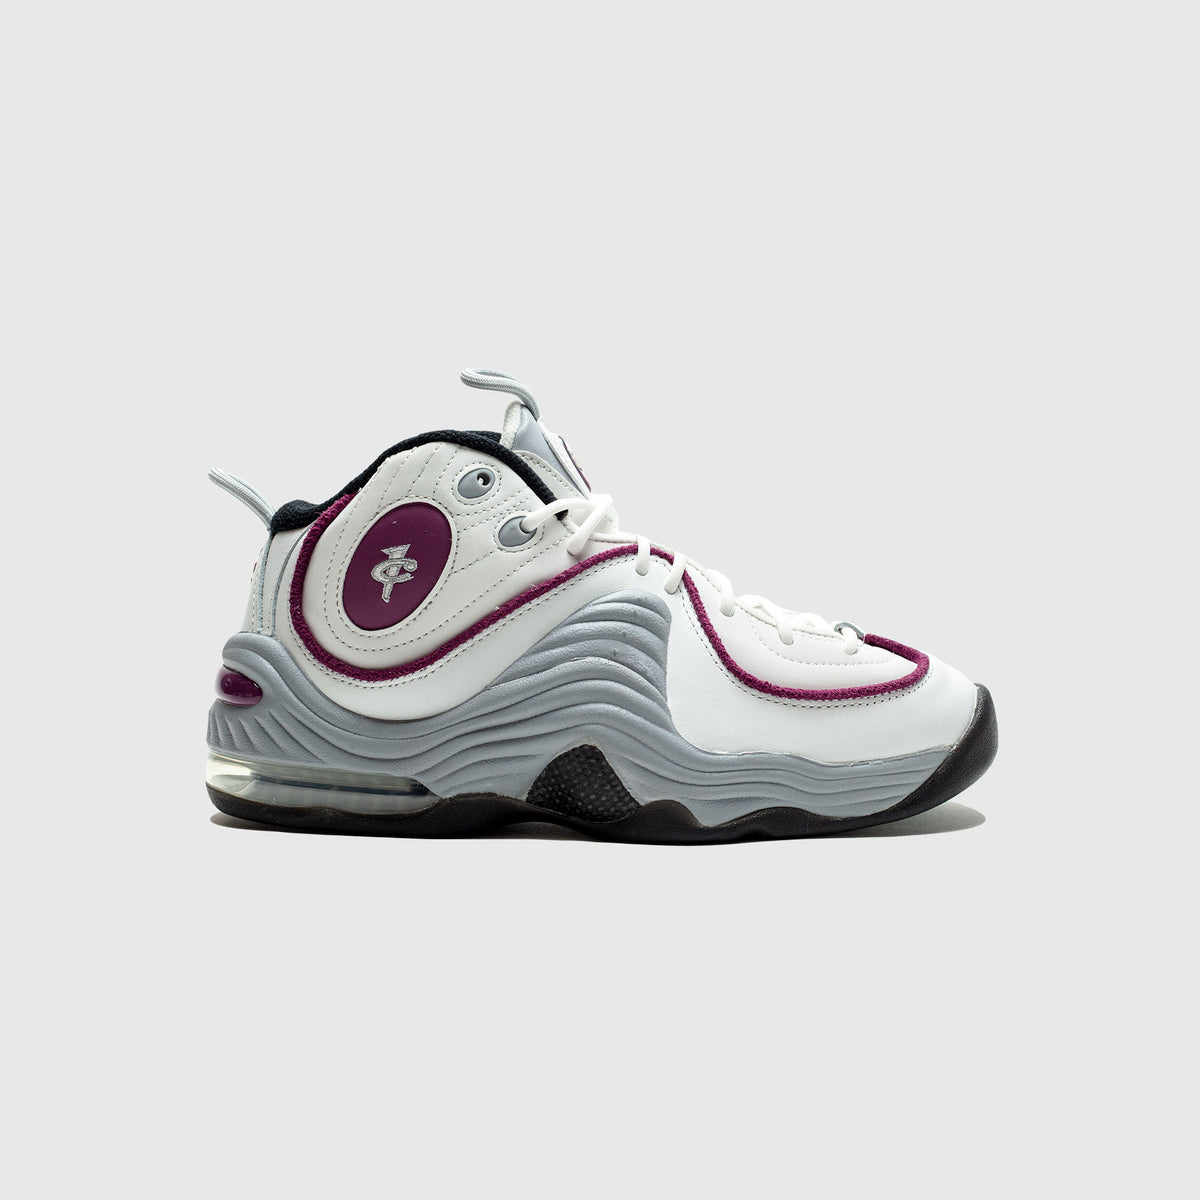 Nike Air Penny 2 Rosewood - Size 10 Women